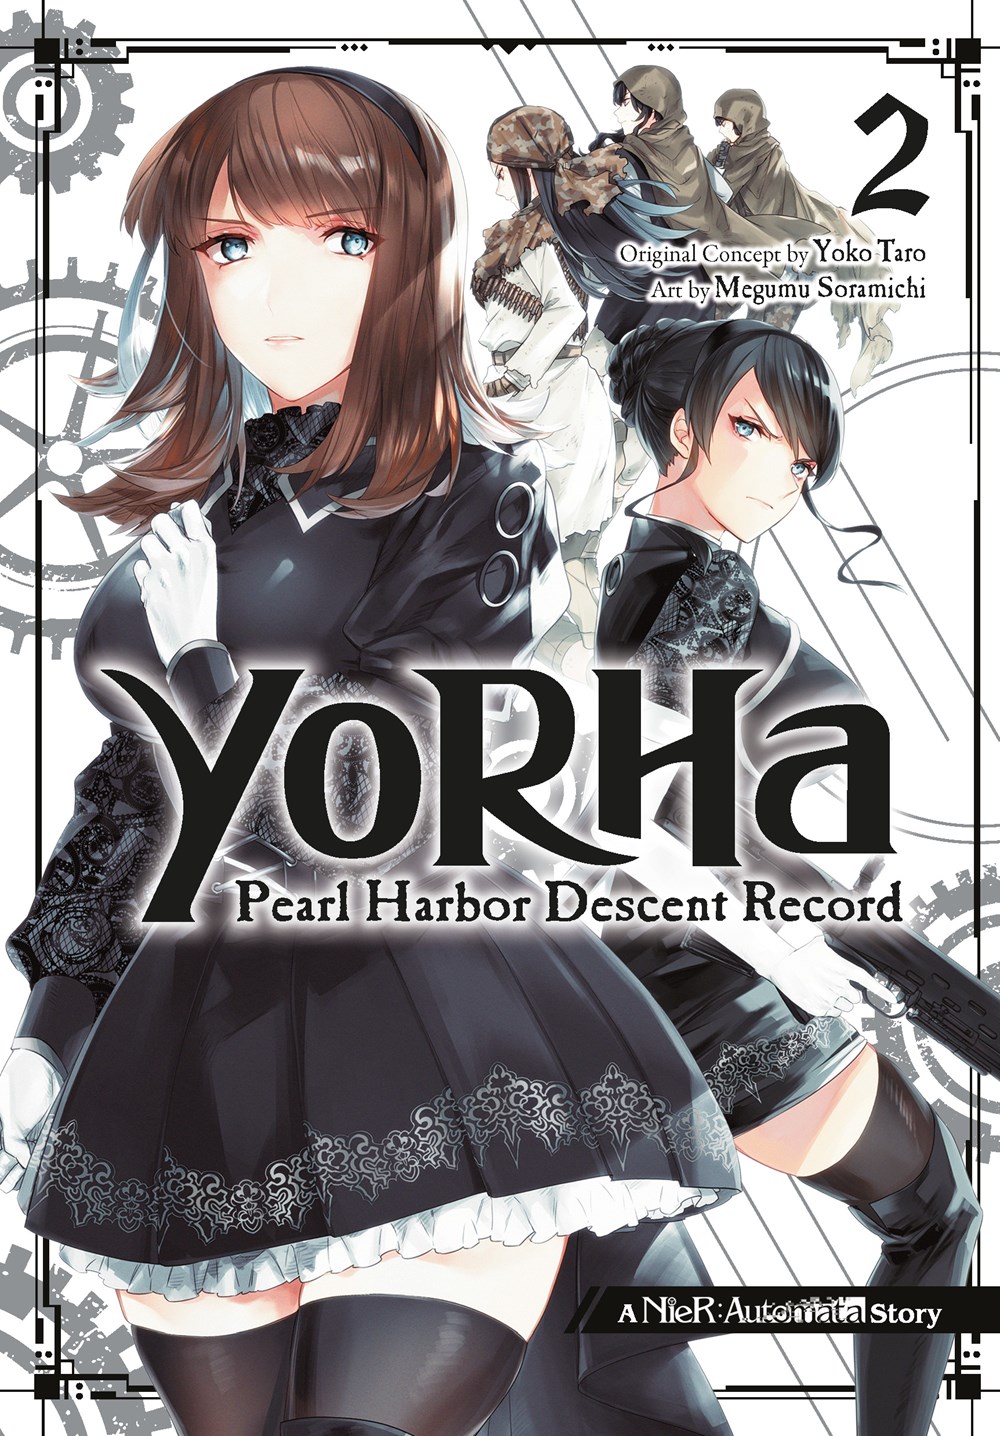 YoRHa: Pearl Harbor Descent Record Volume 2 Review